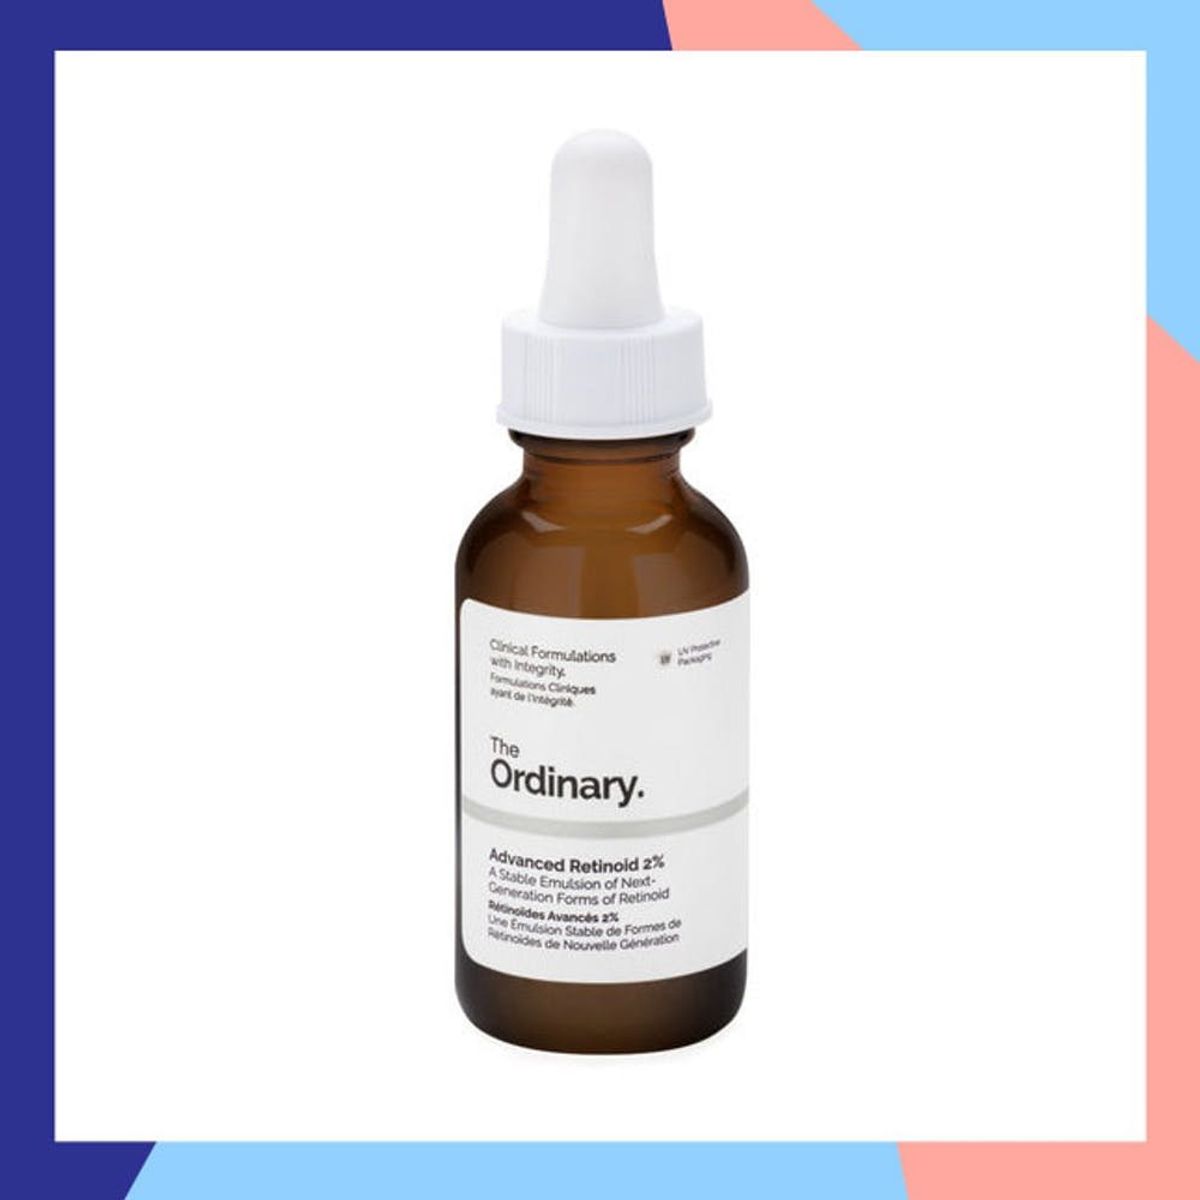 Why Everyone Is Obsessed With The Ordinary, the Cult-Favorite Skincare Brand